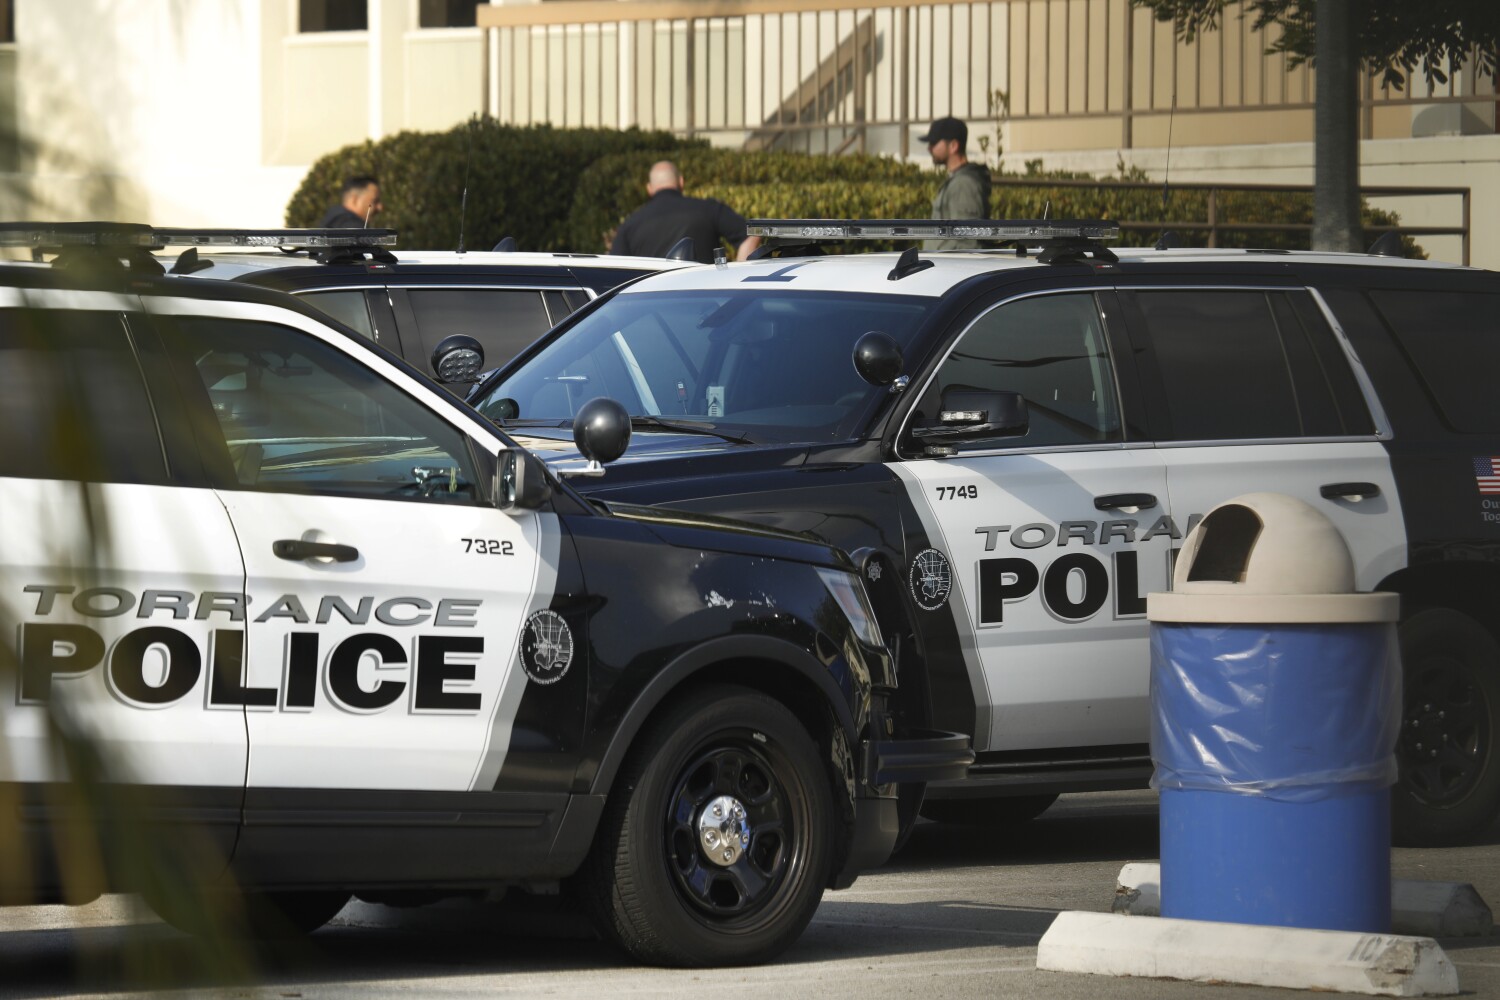 Judge's ruling limits what prosecutors can share about Torrance police text scandal